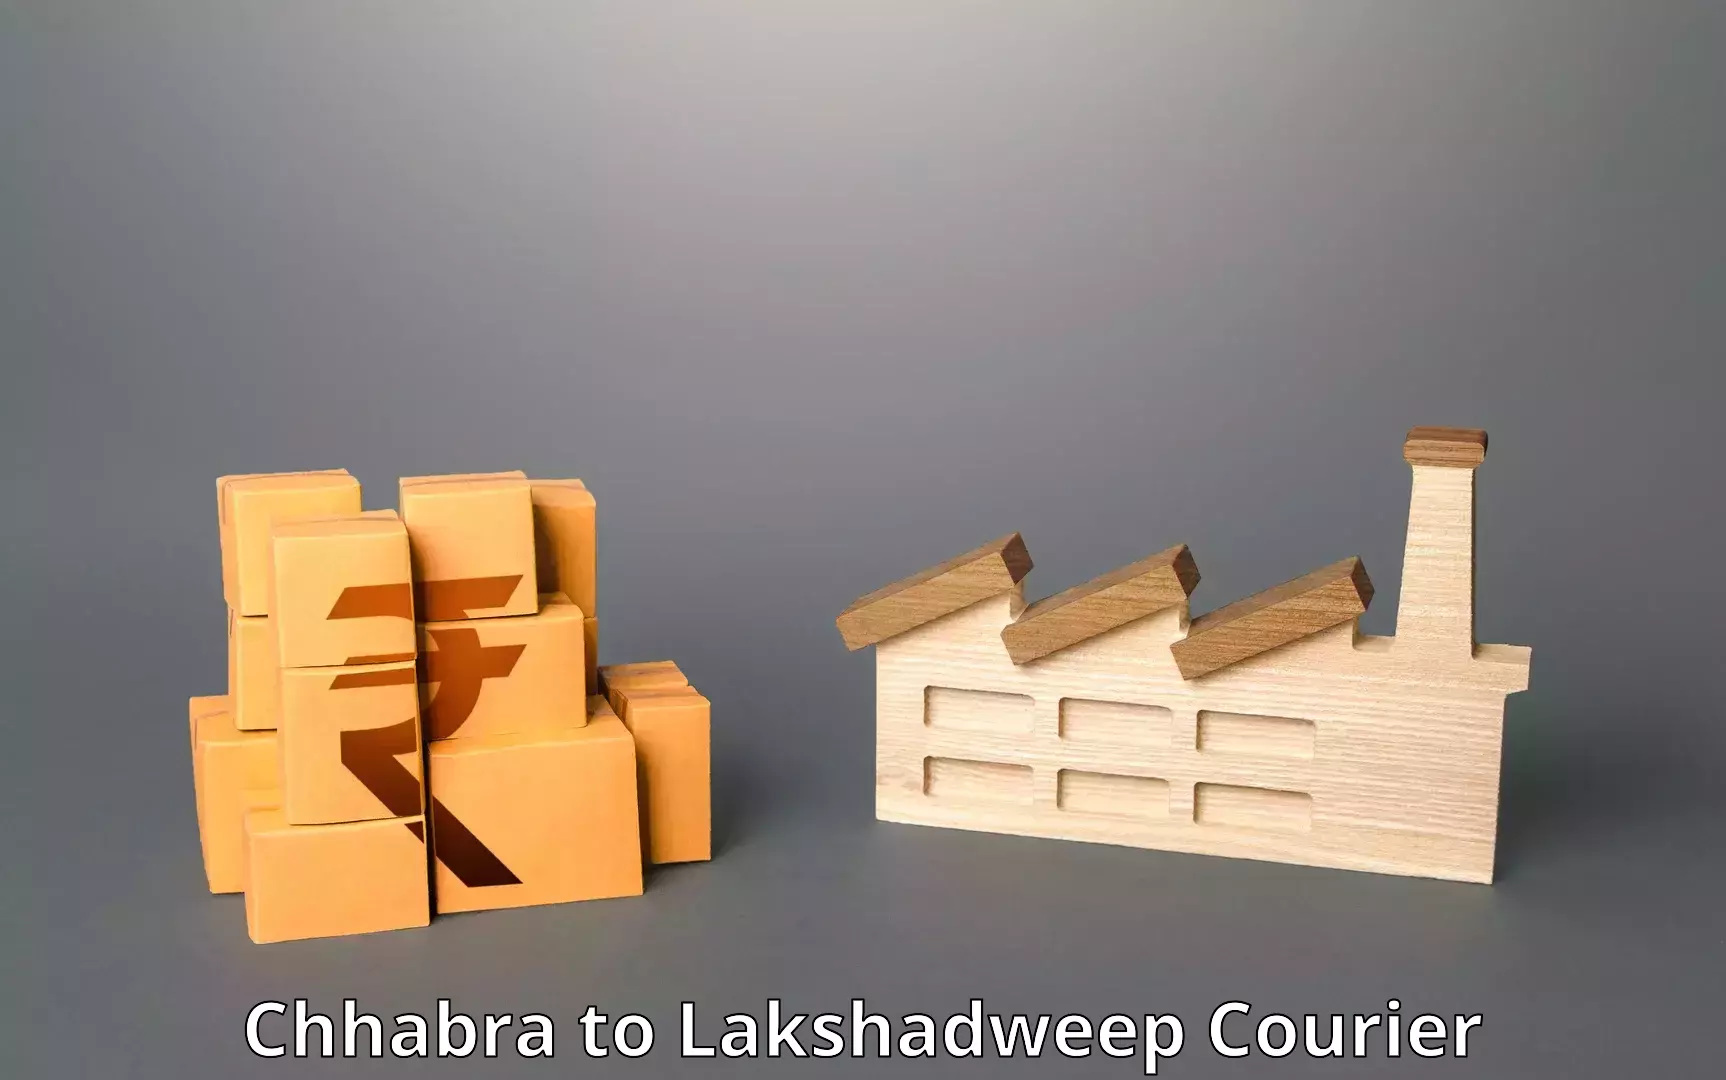 On-call courier service Chhabra to Lakshadweep